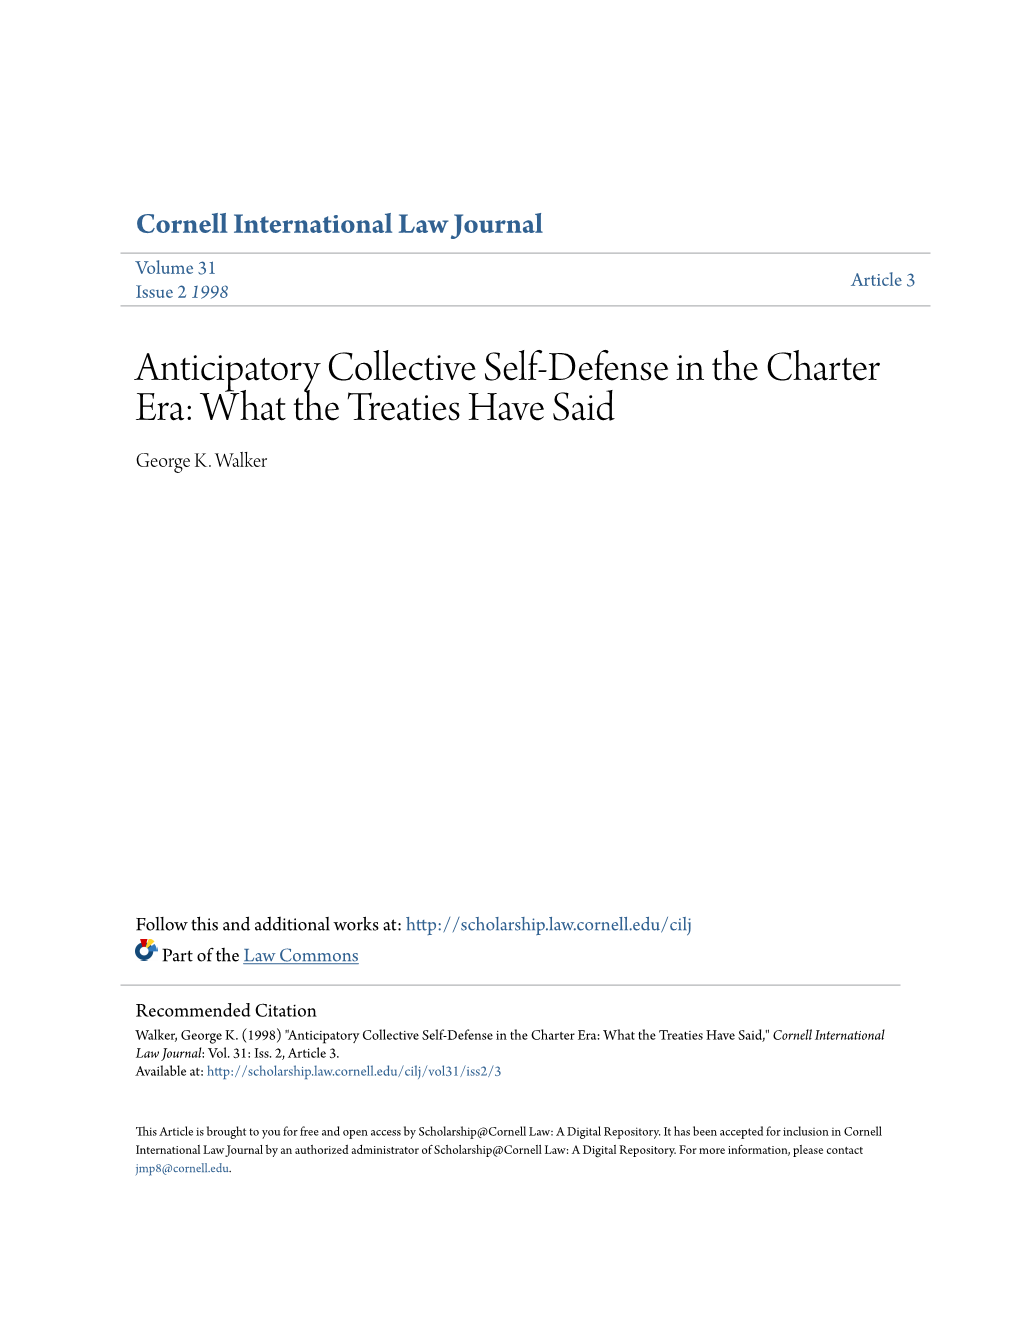 Anticipatory Collective Self-Defense in the Charter Era: What the Treaties Have Said George K